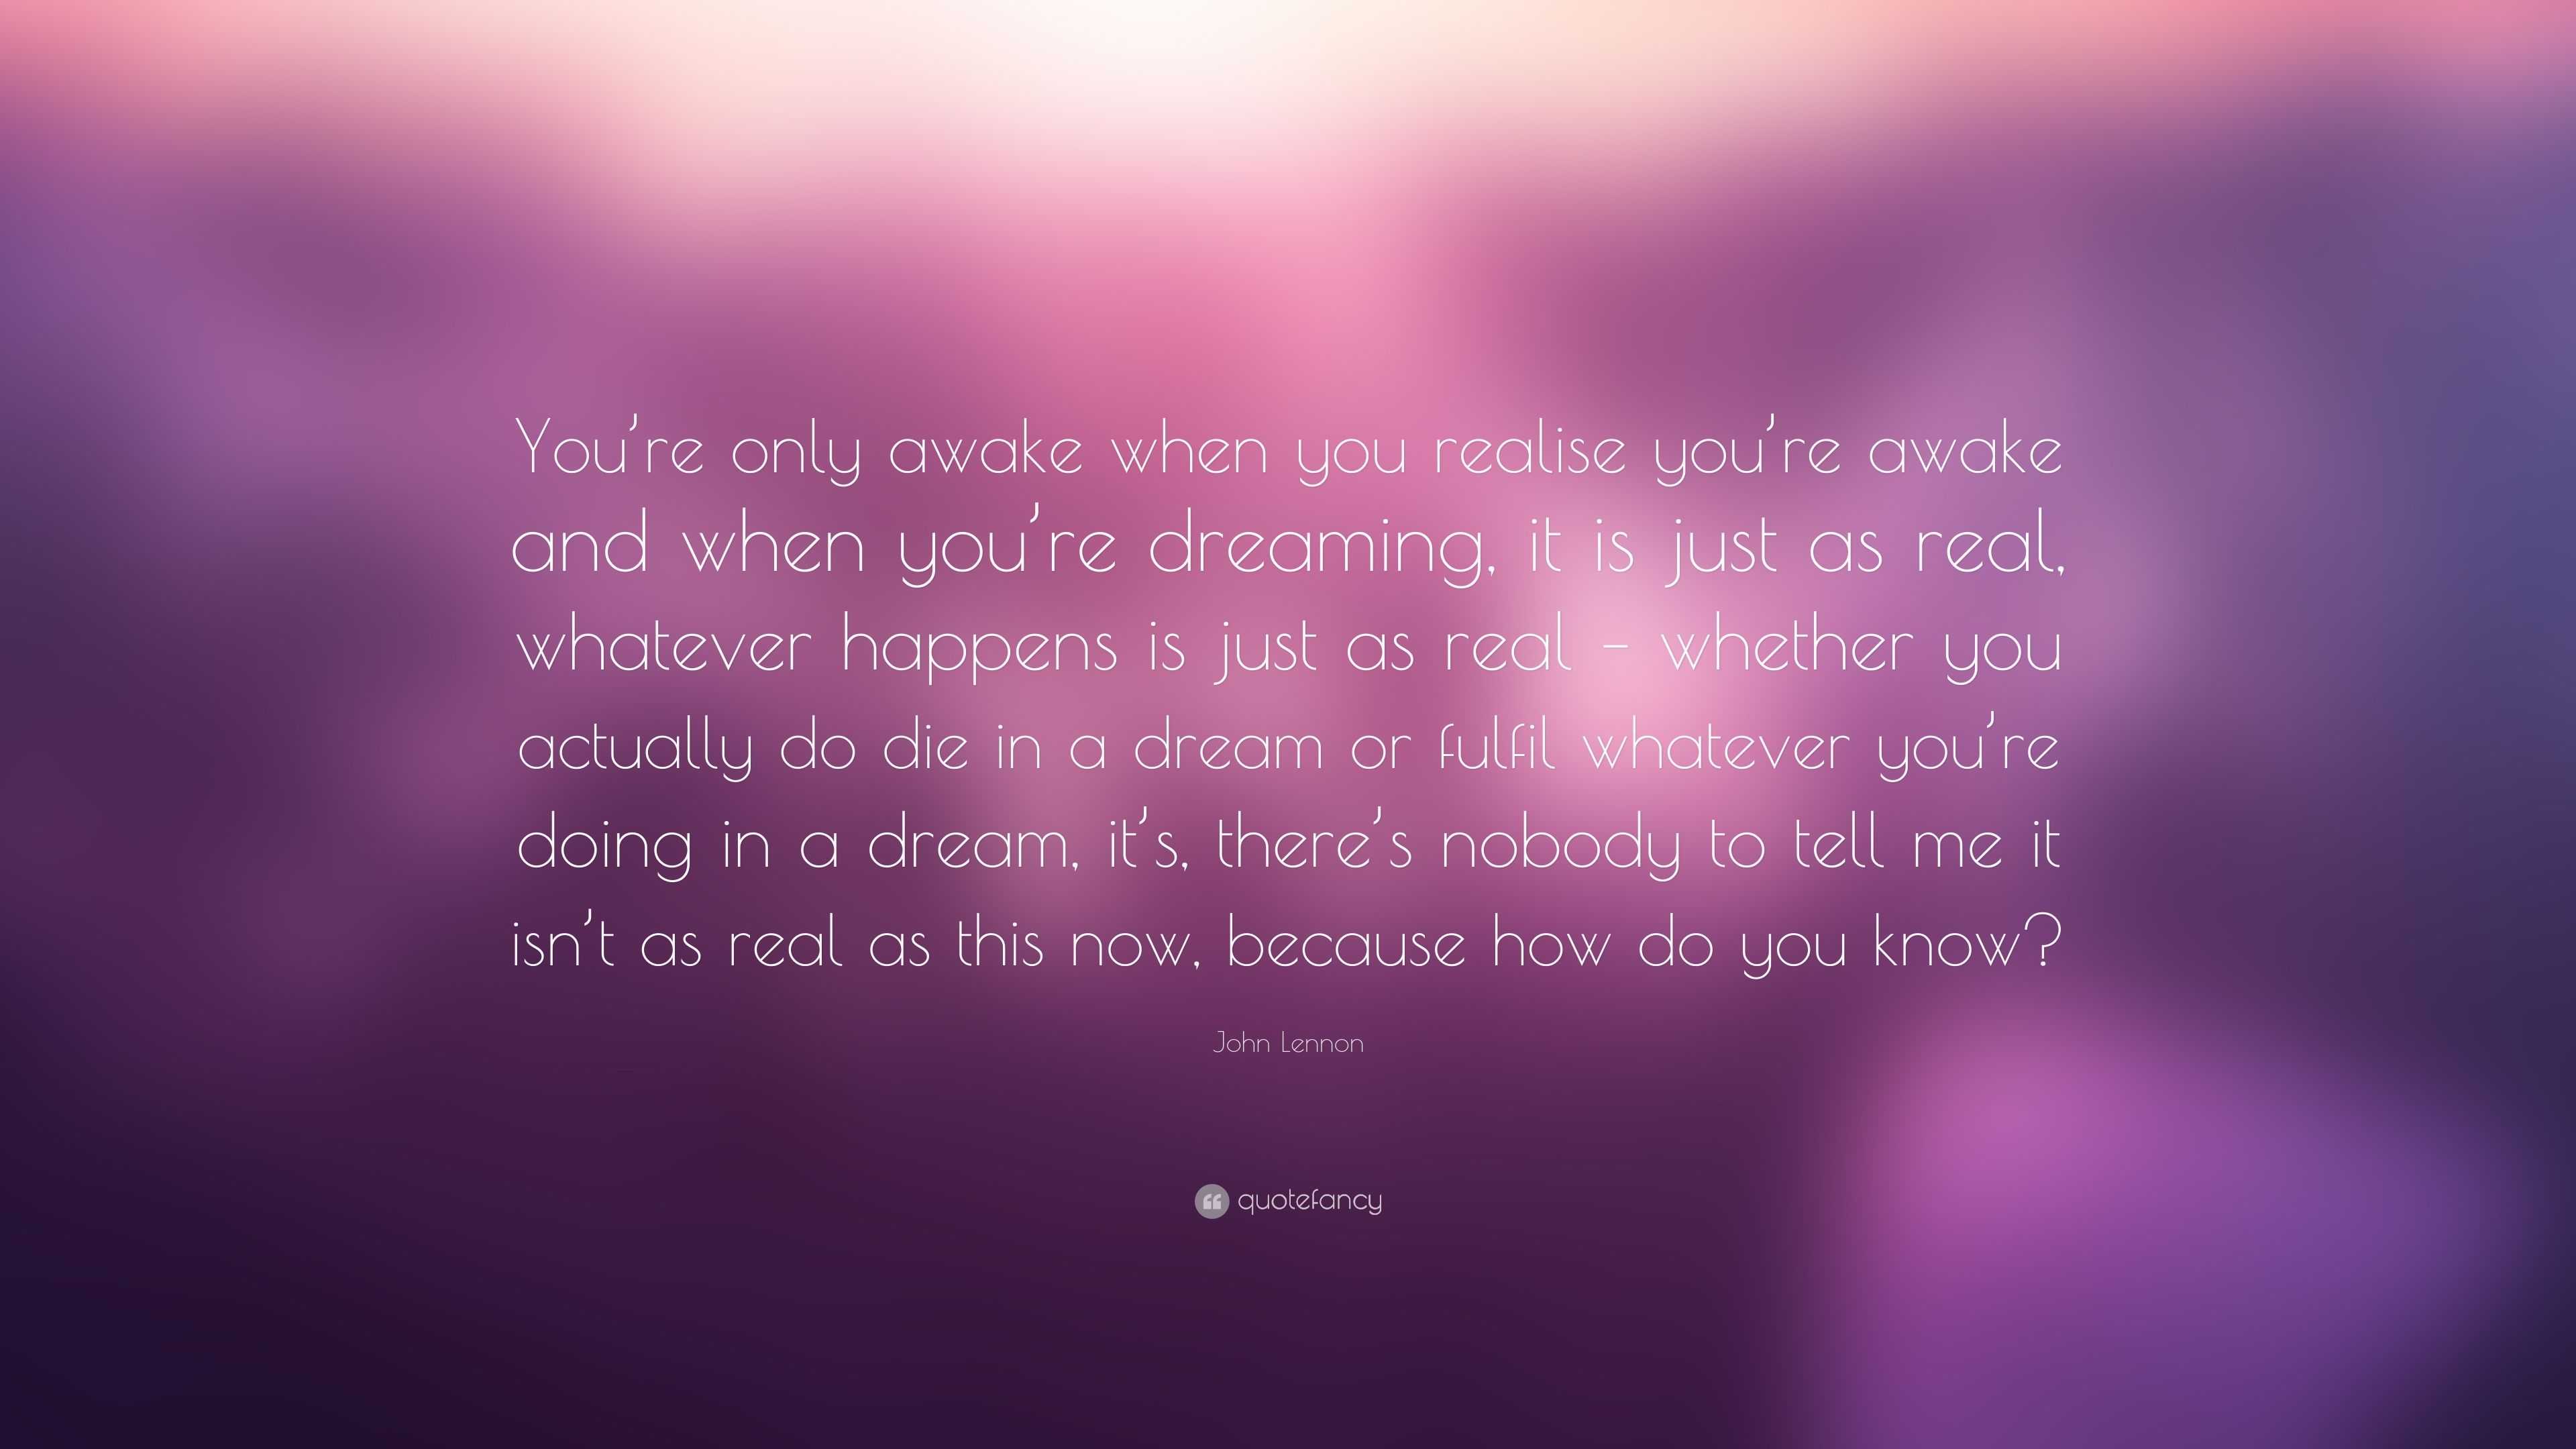 John Lennon Quote: “You’re only awake when you realise you’re awake and ...